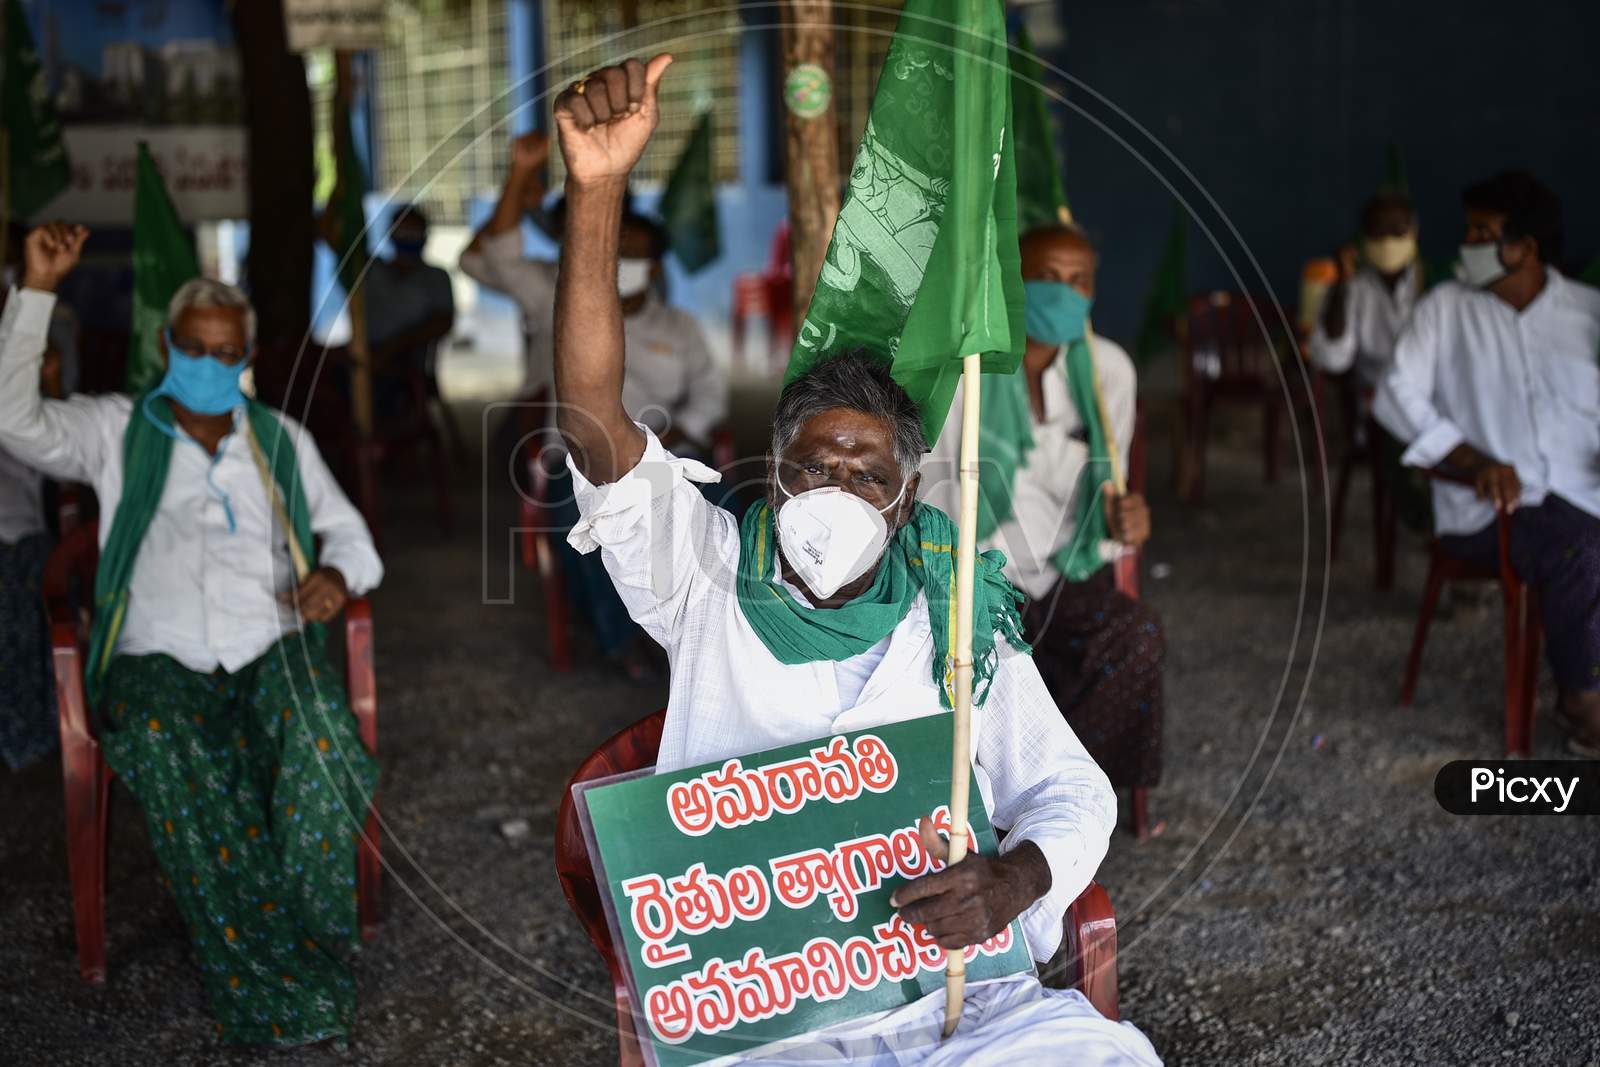 Farmers Hold Placards As They Protest Against Governor Biswabhusan Harichandan's Approval For Three Capitals For The State Of Andhra Pradesh, At Velagapudi In Guntur District, August 02, 2020.